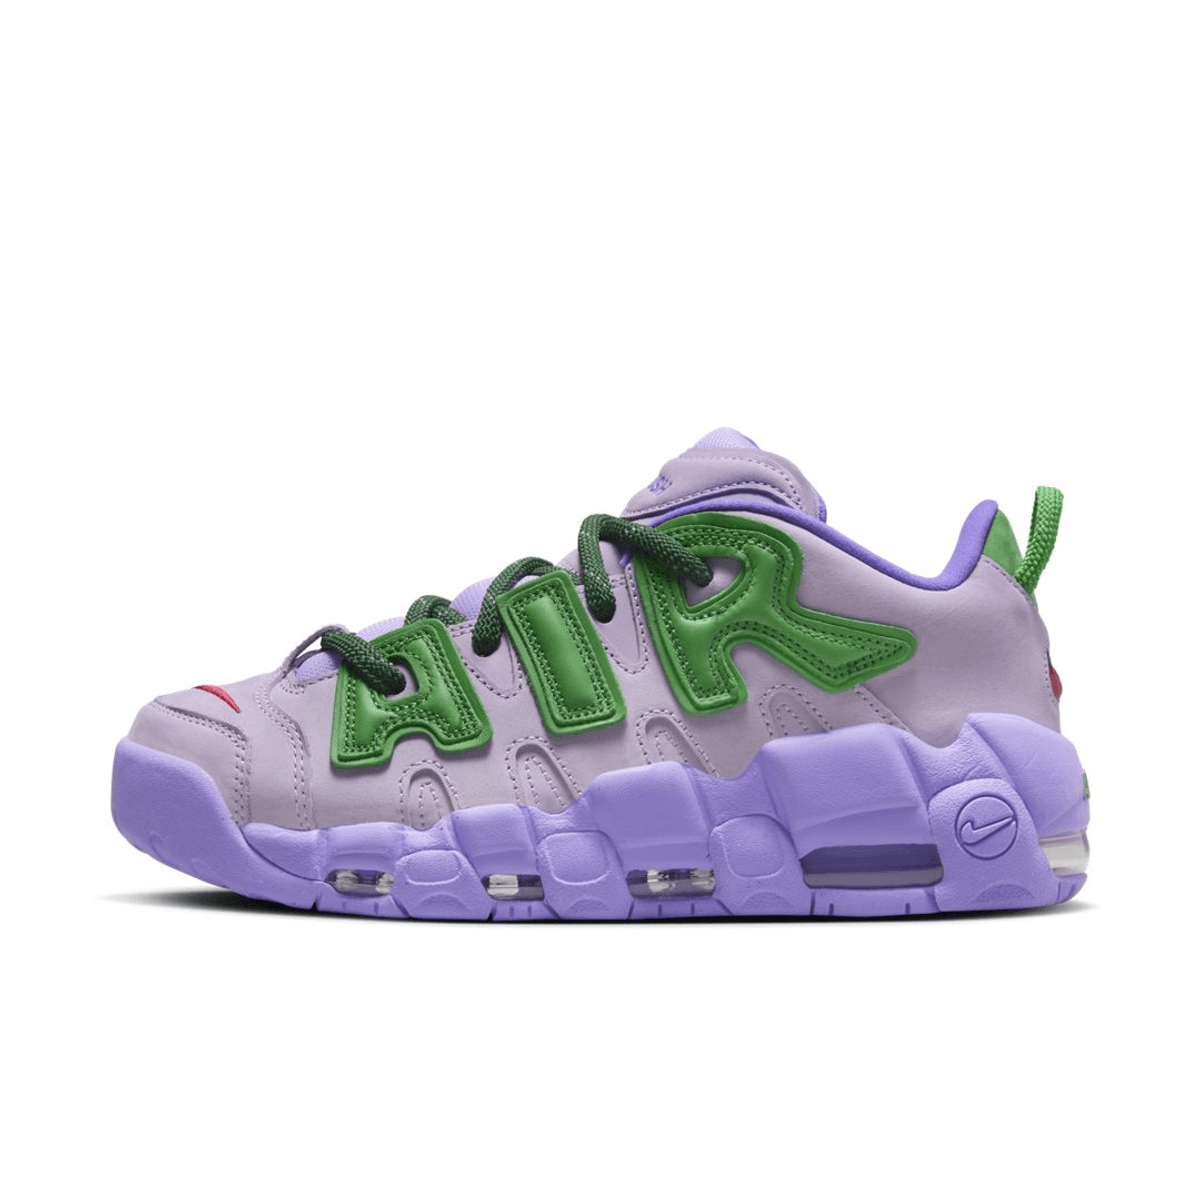 The AMBUSH x Nike Air More Uptempo Low "Lilac" Releases October 6